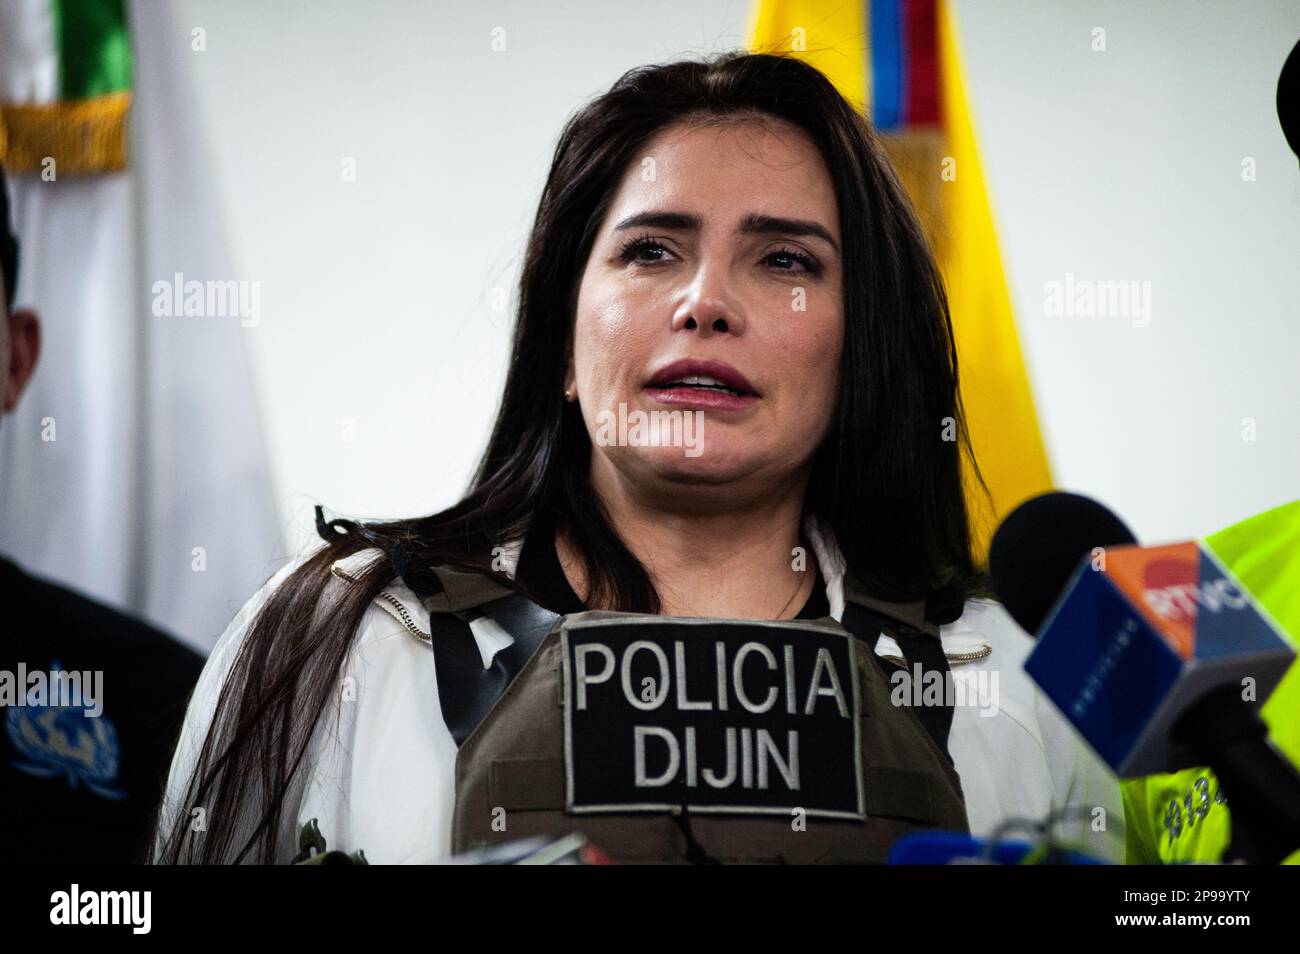 Aida Merlano, former Colombian senator convicted of vote buying and fleeing from justice attends the identification review at the Criminal Investigation Directorate (DIJIN) Headquaters after arriving to Bogota, Colombia March 10, 2023. Photo by: Chepa Beltran/Long Visual Press Stock Photo